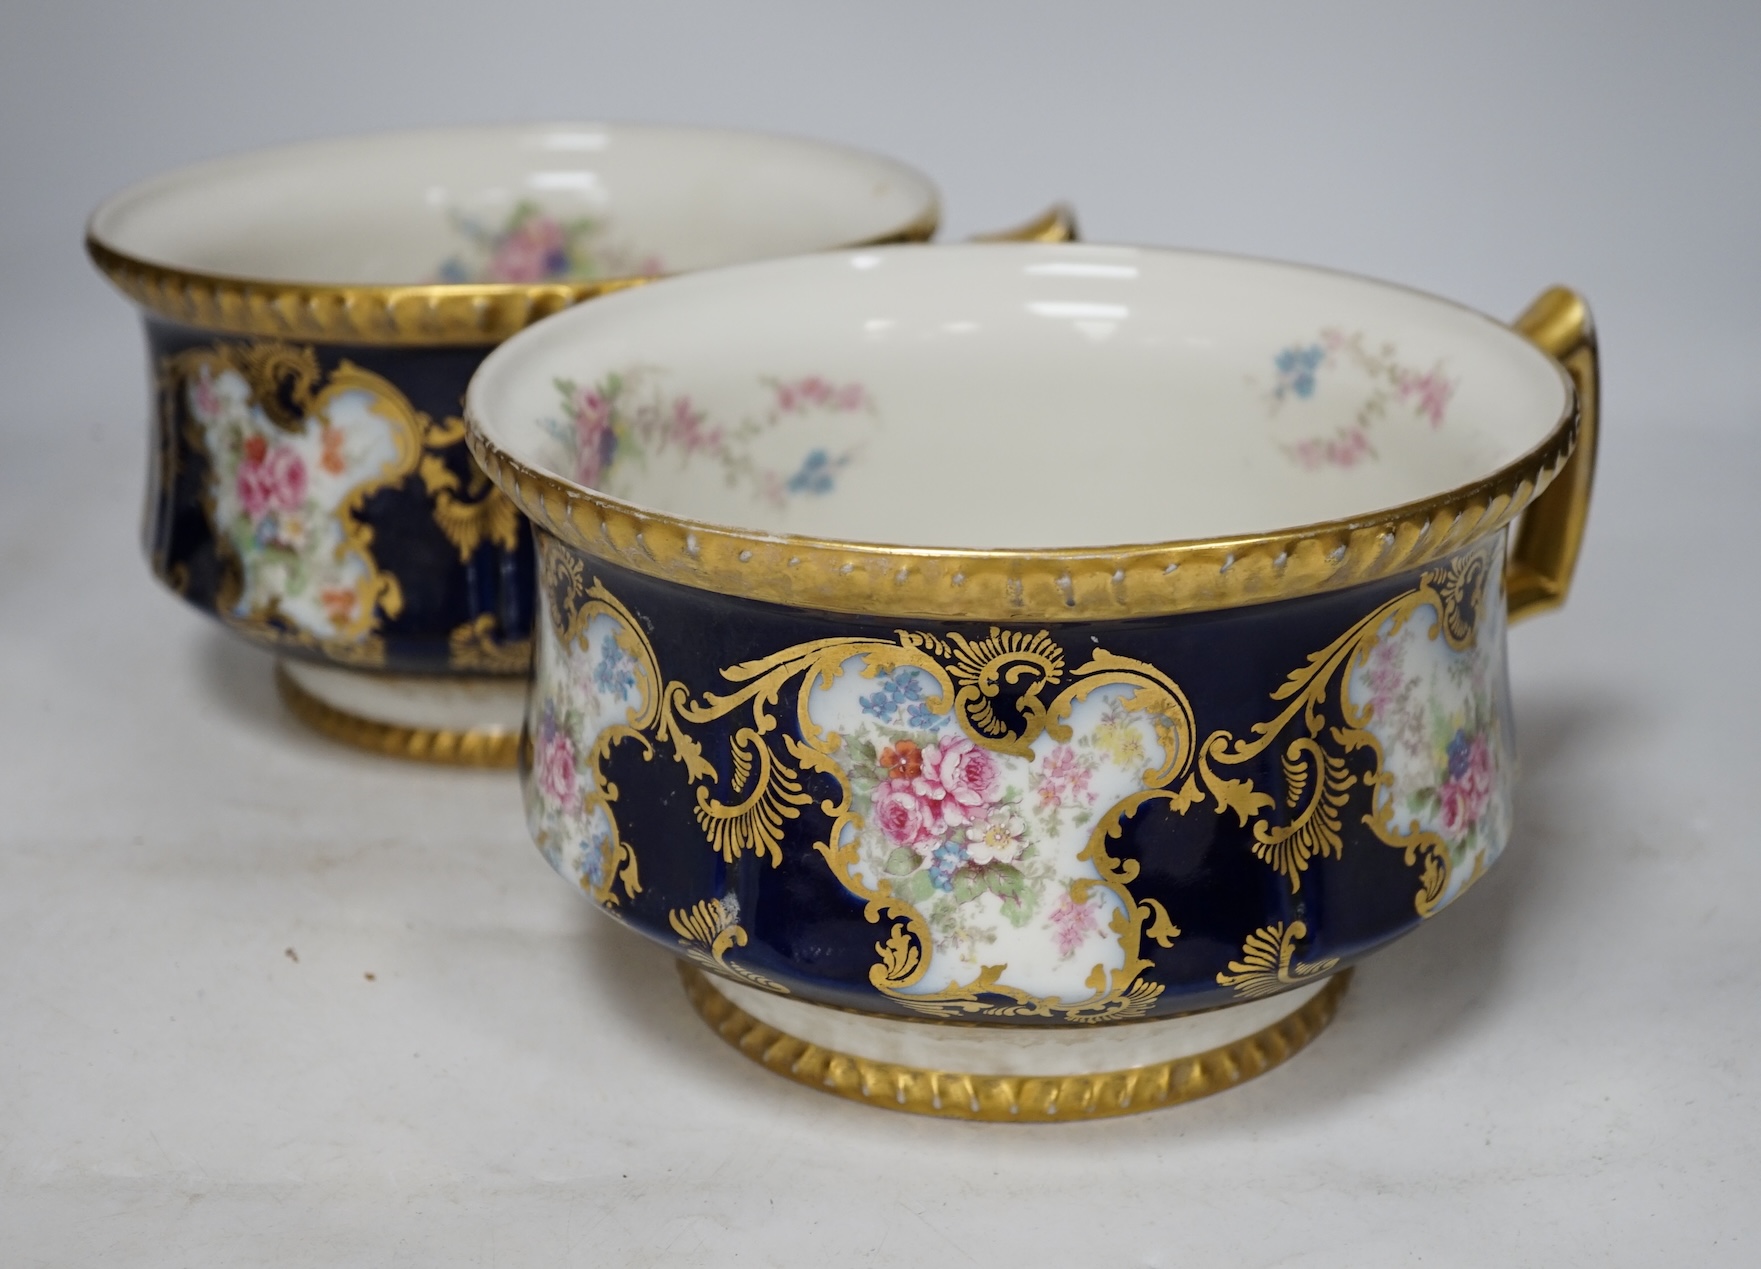 D. & C. Limoges, France, a pair of late 19th / early 20th century chamber pots, 21cm diameter. Condition - fair, some wear